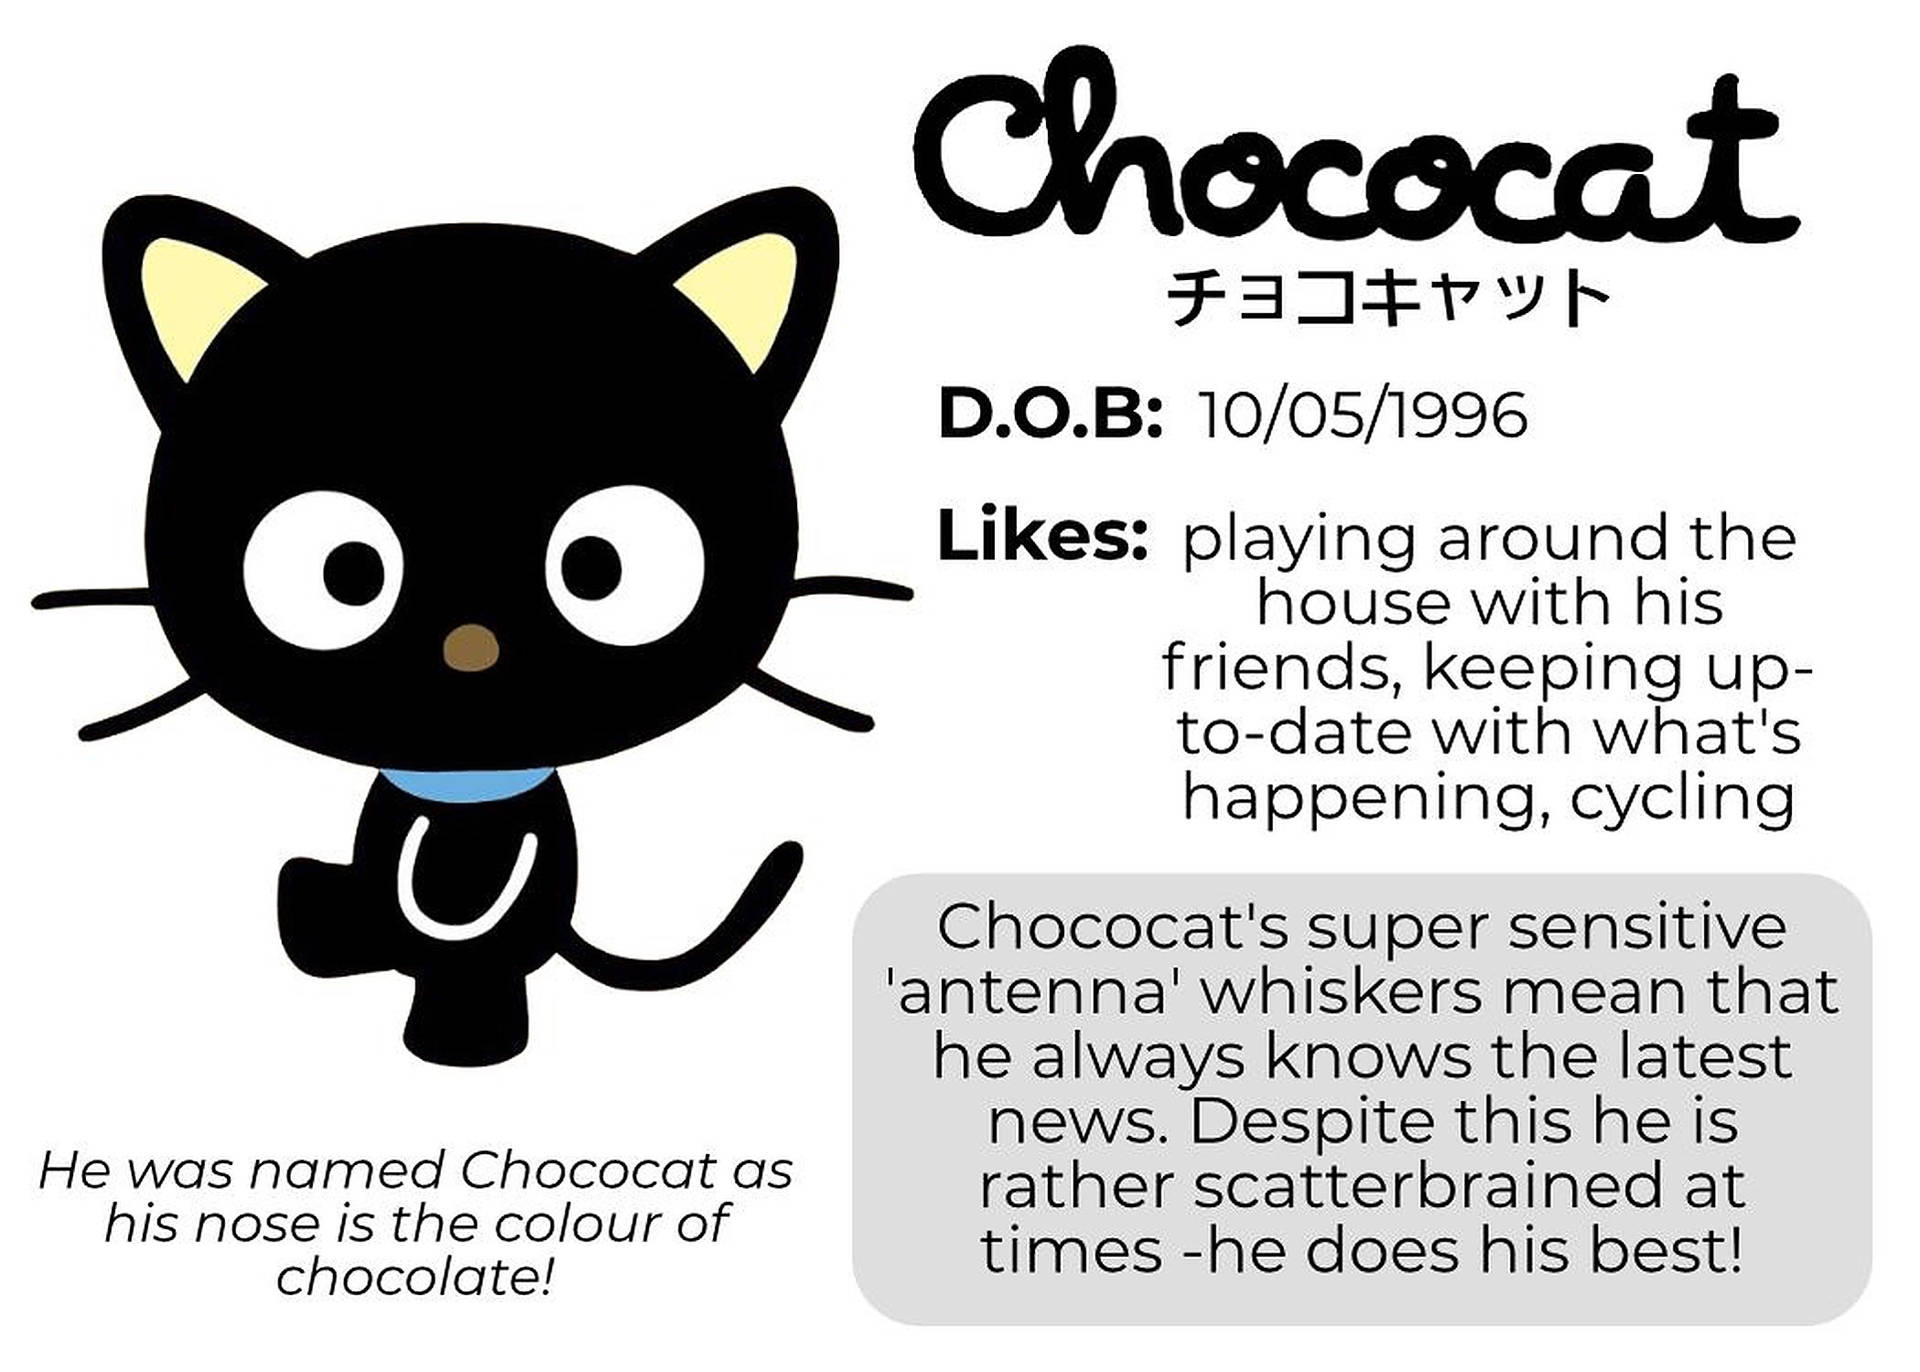 Adorable Chococat Image In High Definition Background